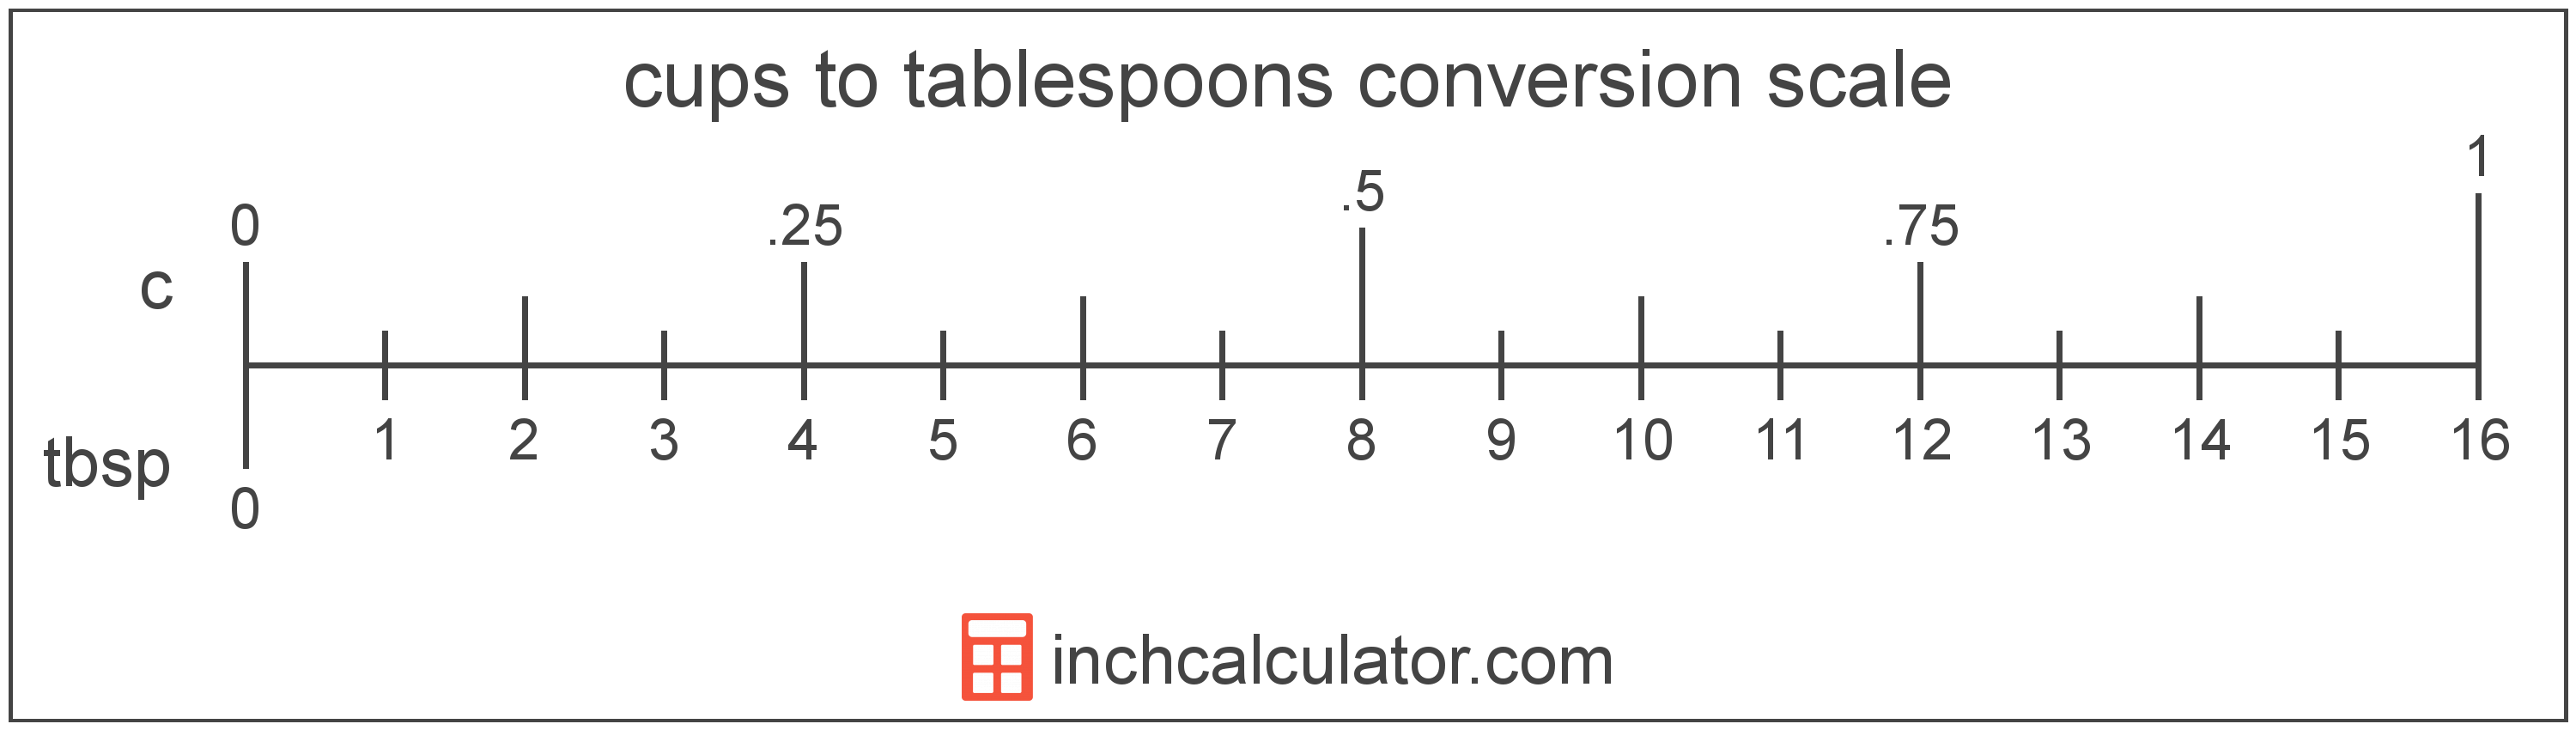 https://www.inchcalculator.com/a/img/unit-conversion/cup-to-tablespoon-conversion-scale.png